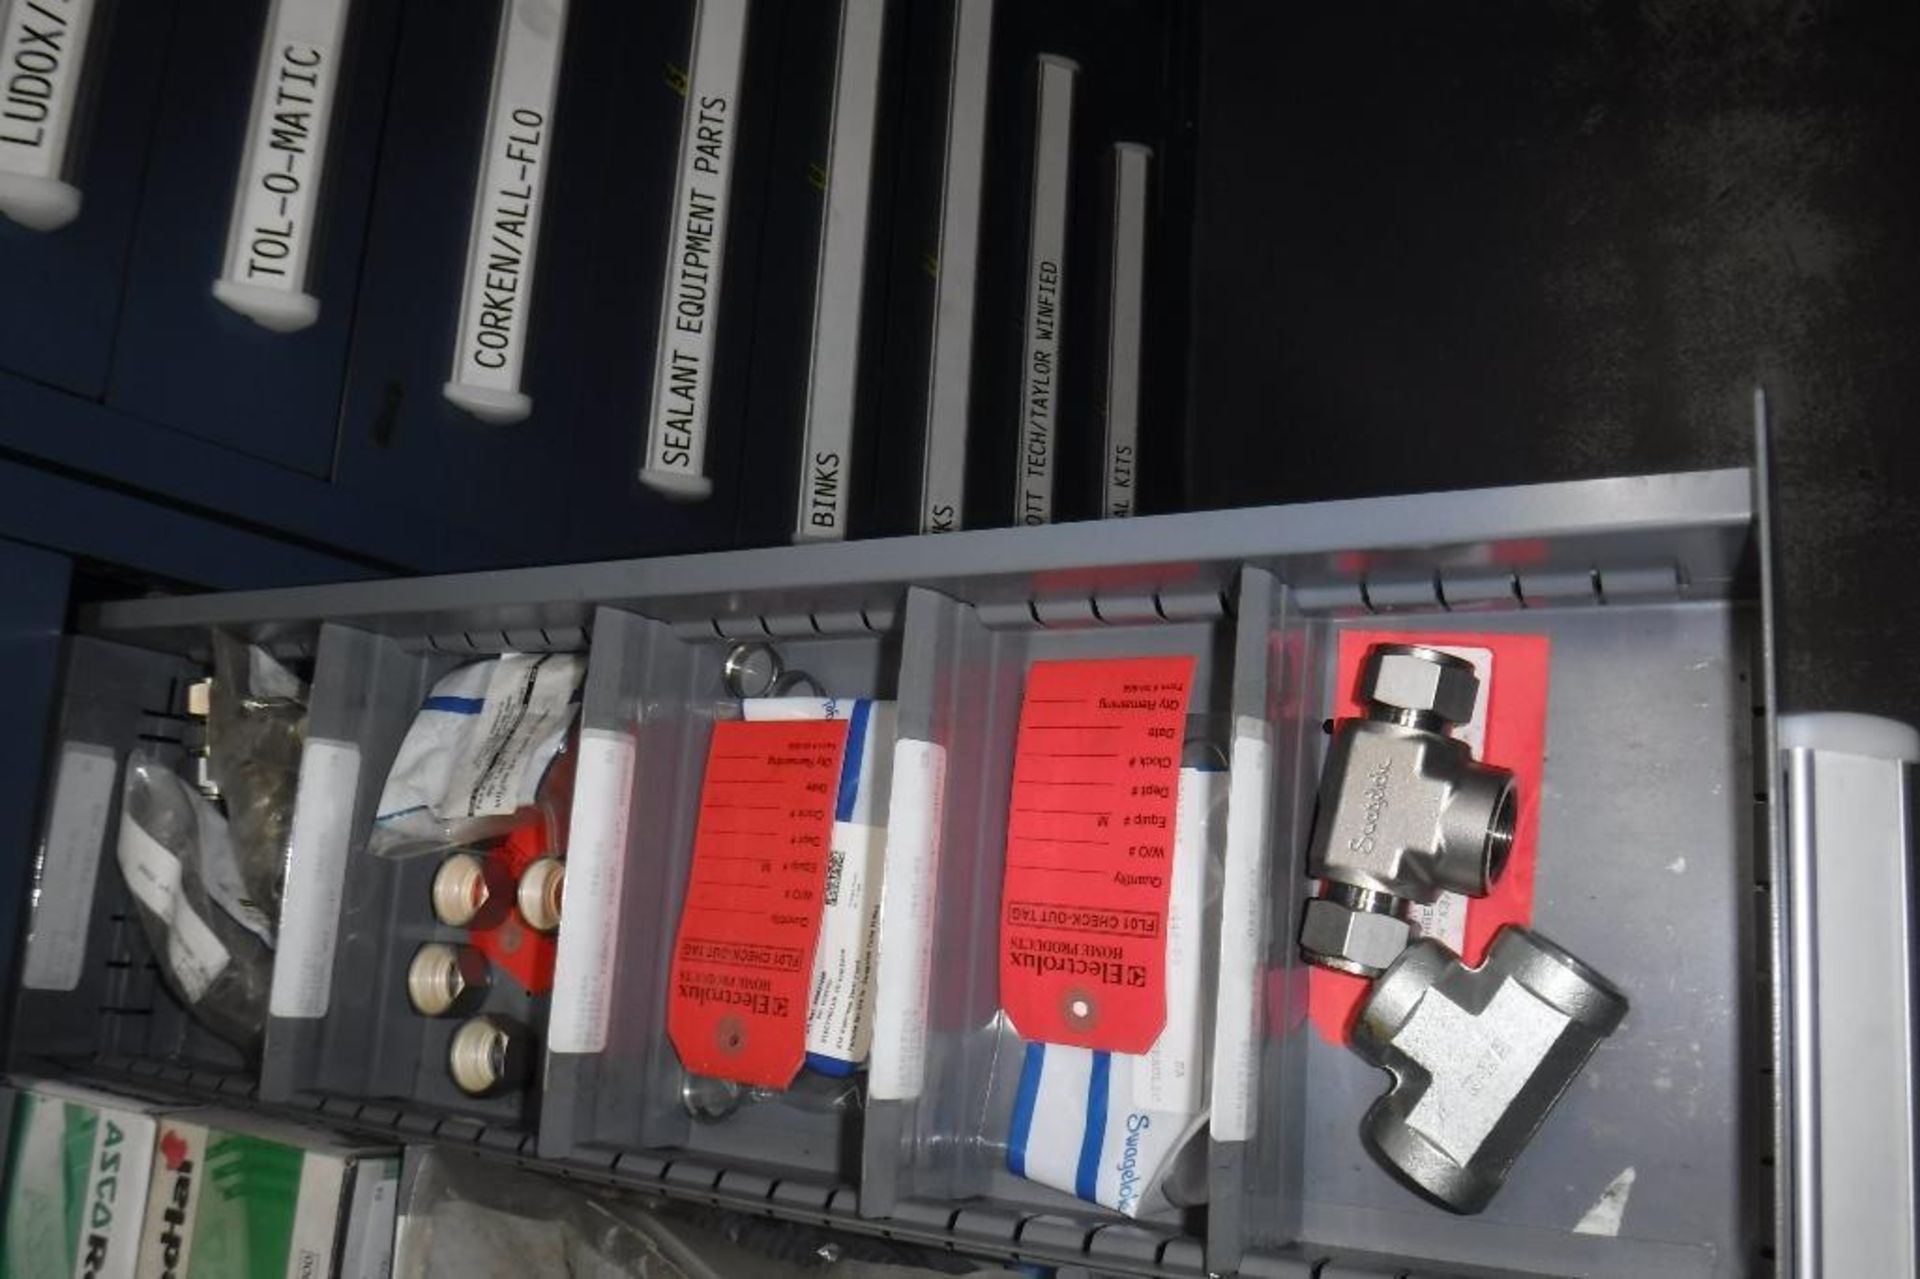 10-Drawer Vidmar Cabinet with Contents-Swage Locks, Loc-Line, Charger, Filterdyne, PCU Coupler, Vari - Image 11 of 15